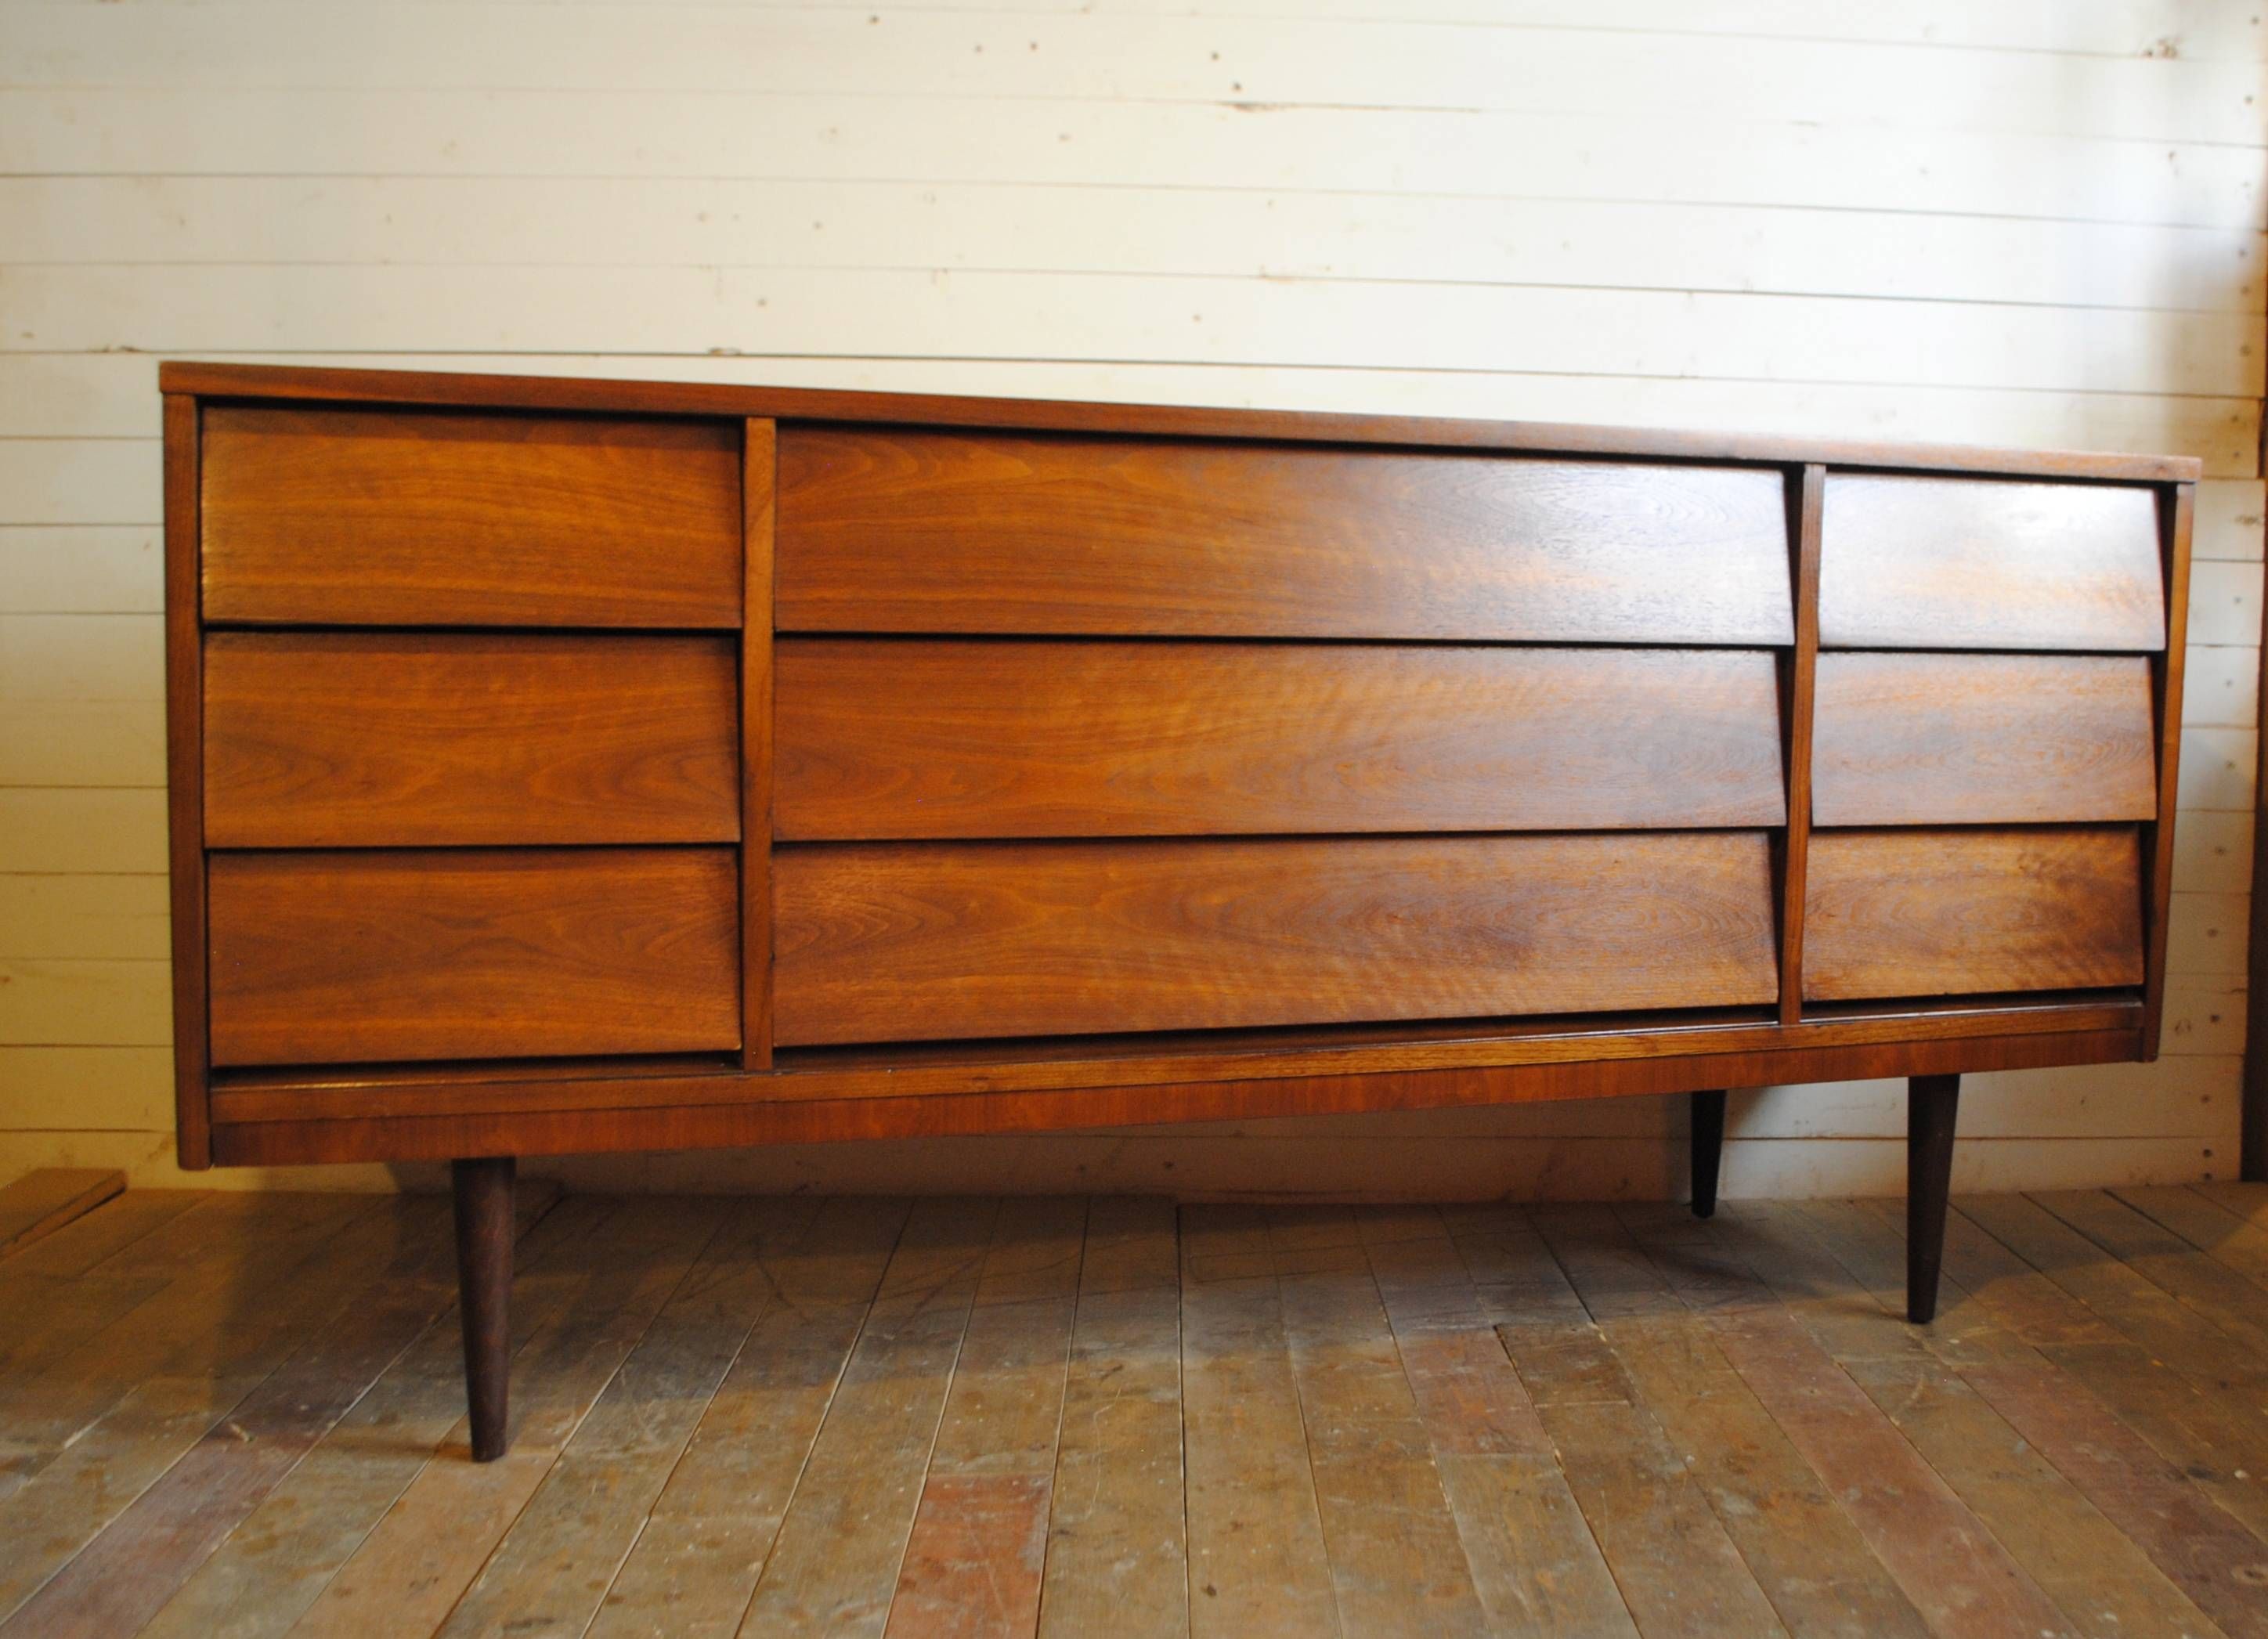 Modern Credenzas Sideboards Cute Mid Century Modern Credenza For Inside Credenza Buffet Sideboards (View 13 of 15)